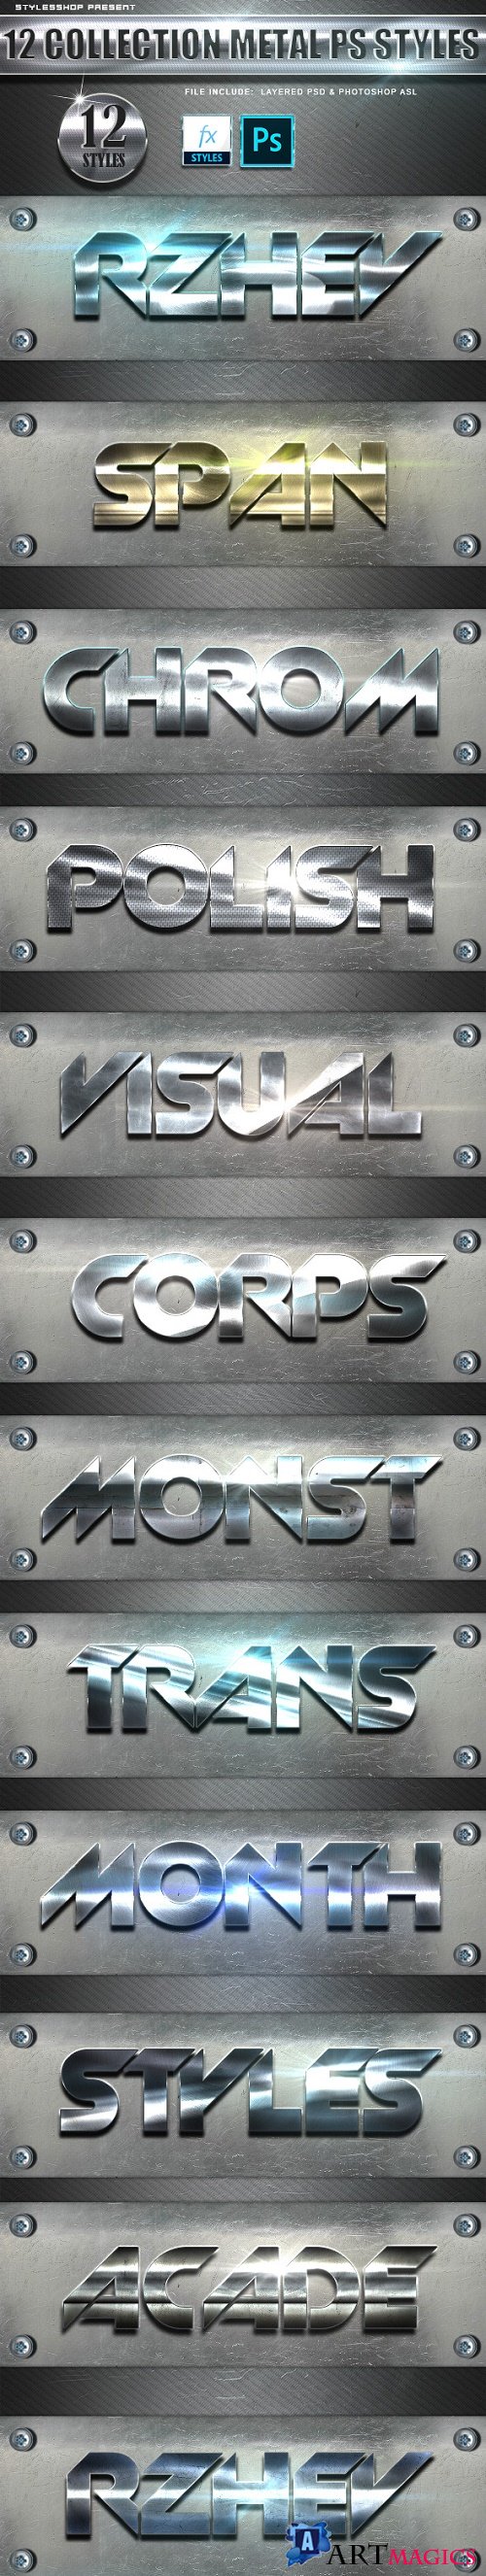 12 Collection Metal Photoshop Text Styles Vol 3 | Text Effects 24783635